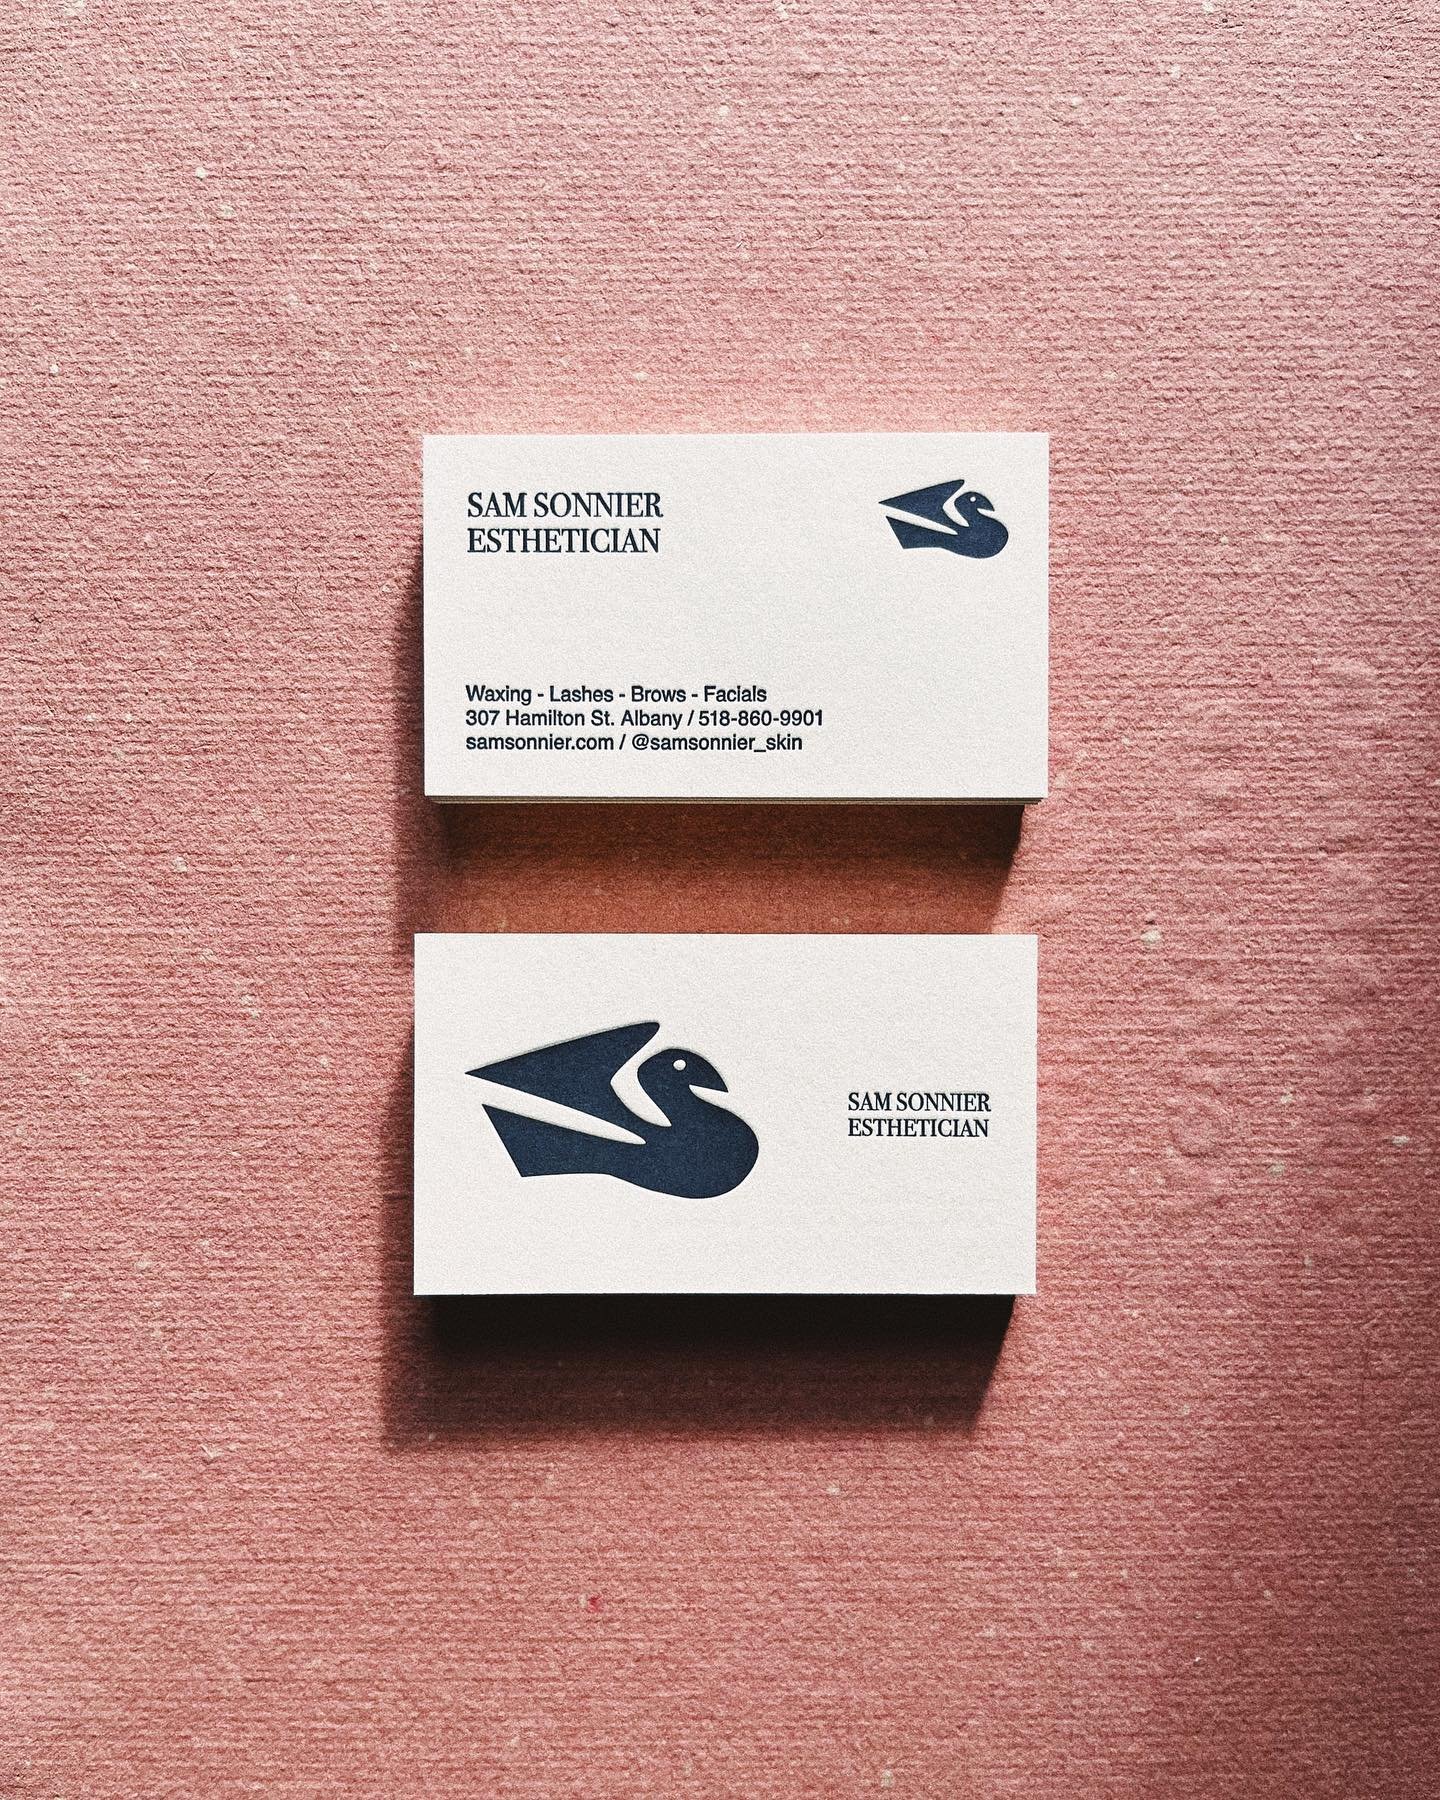 Love how these business cards turned out for @samsonnier_skin. Masterful letterpress printing by the best @readymixdesign! (Swipe to the end for Maeve delivering me some of her cheese)